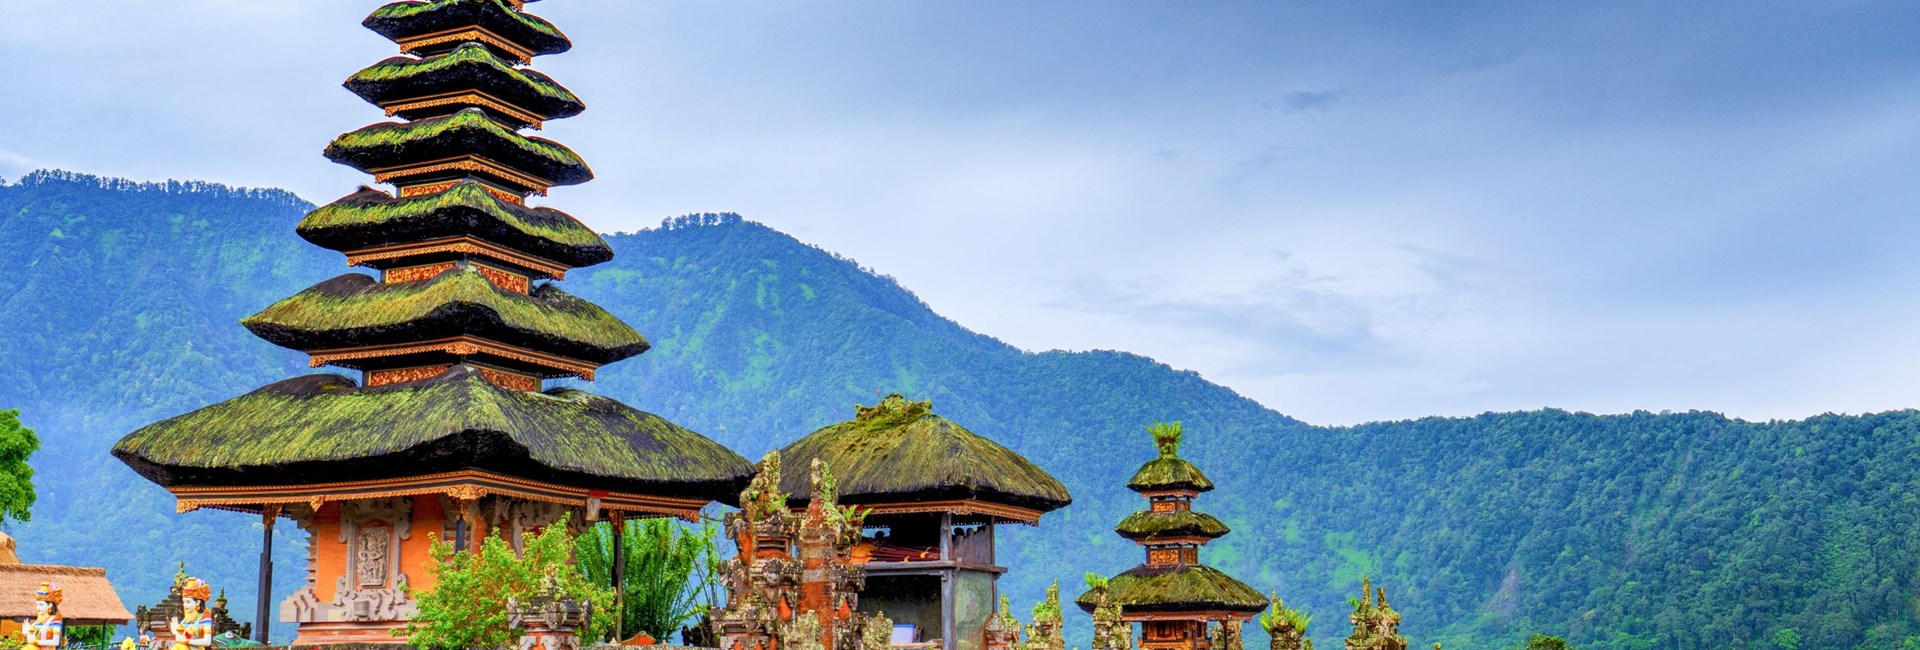 colourful temple in Bali by water with hills in background